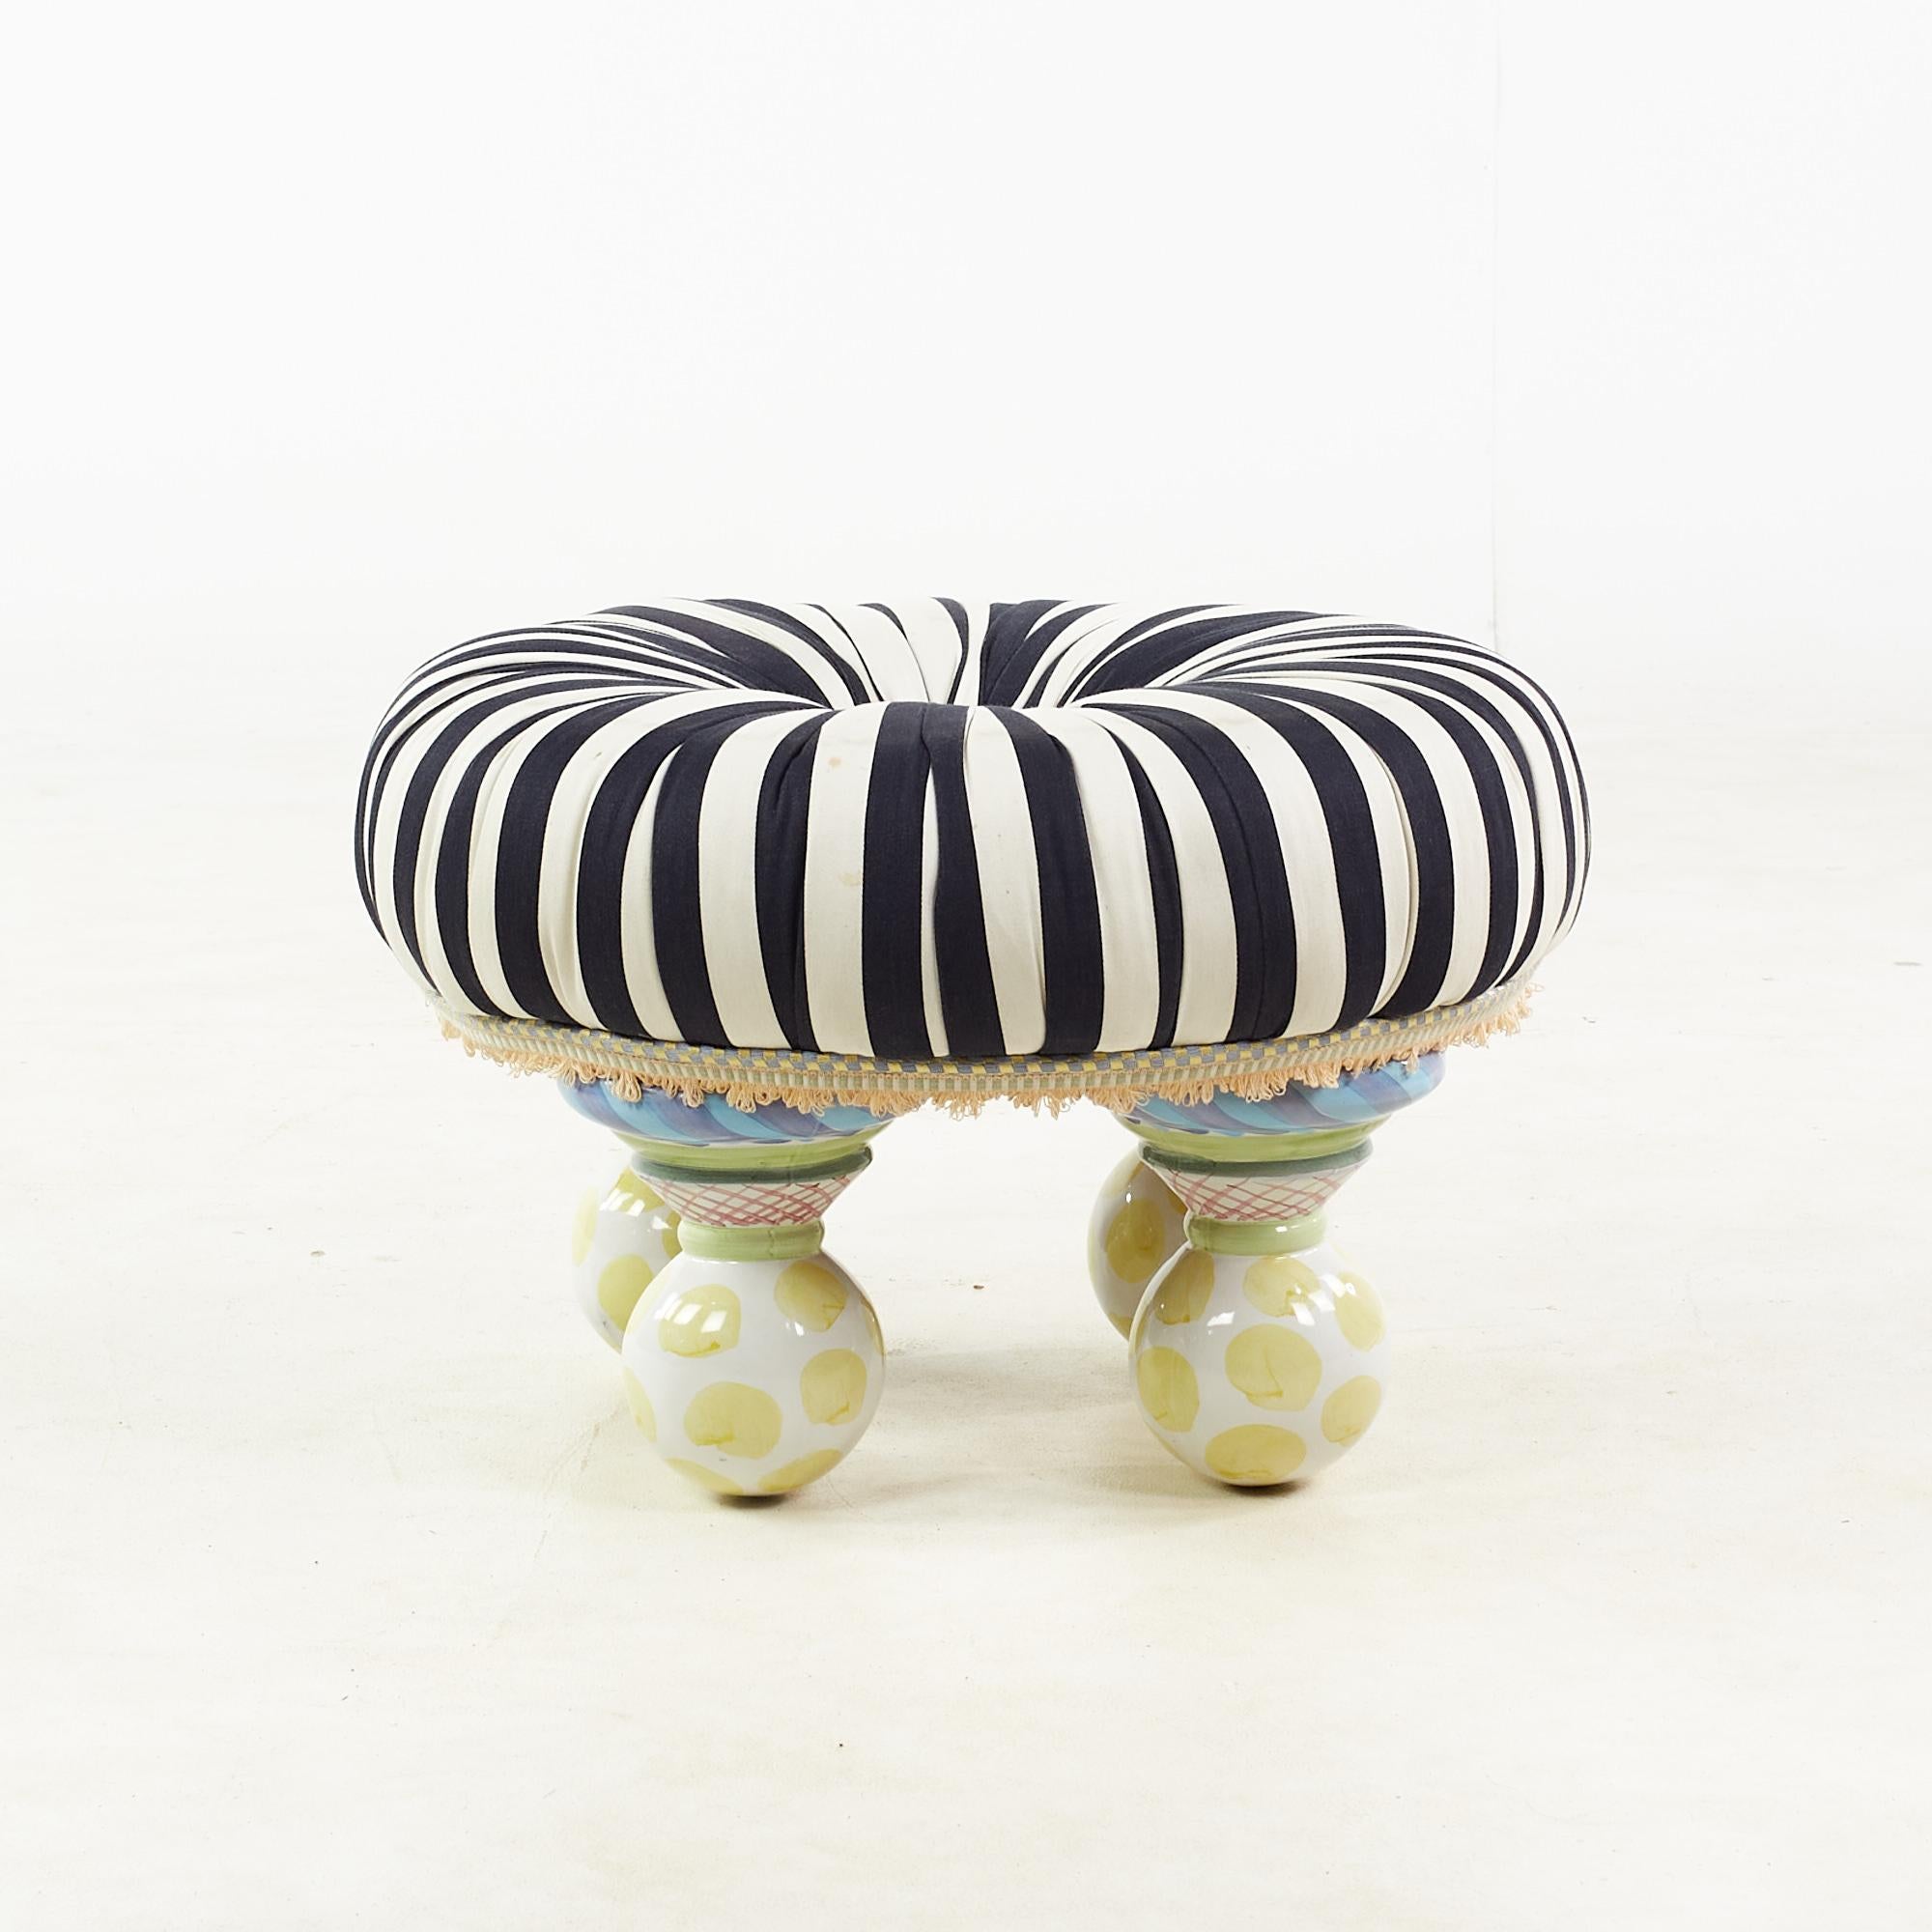 American MacKenzie Childs Contemporary Ottoman with Hand Painted Porcelain Legs